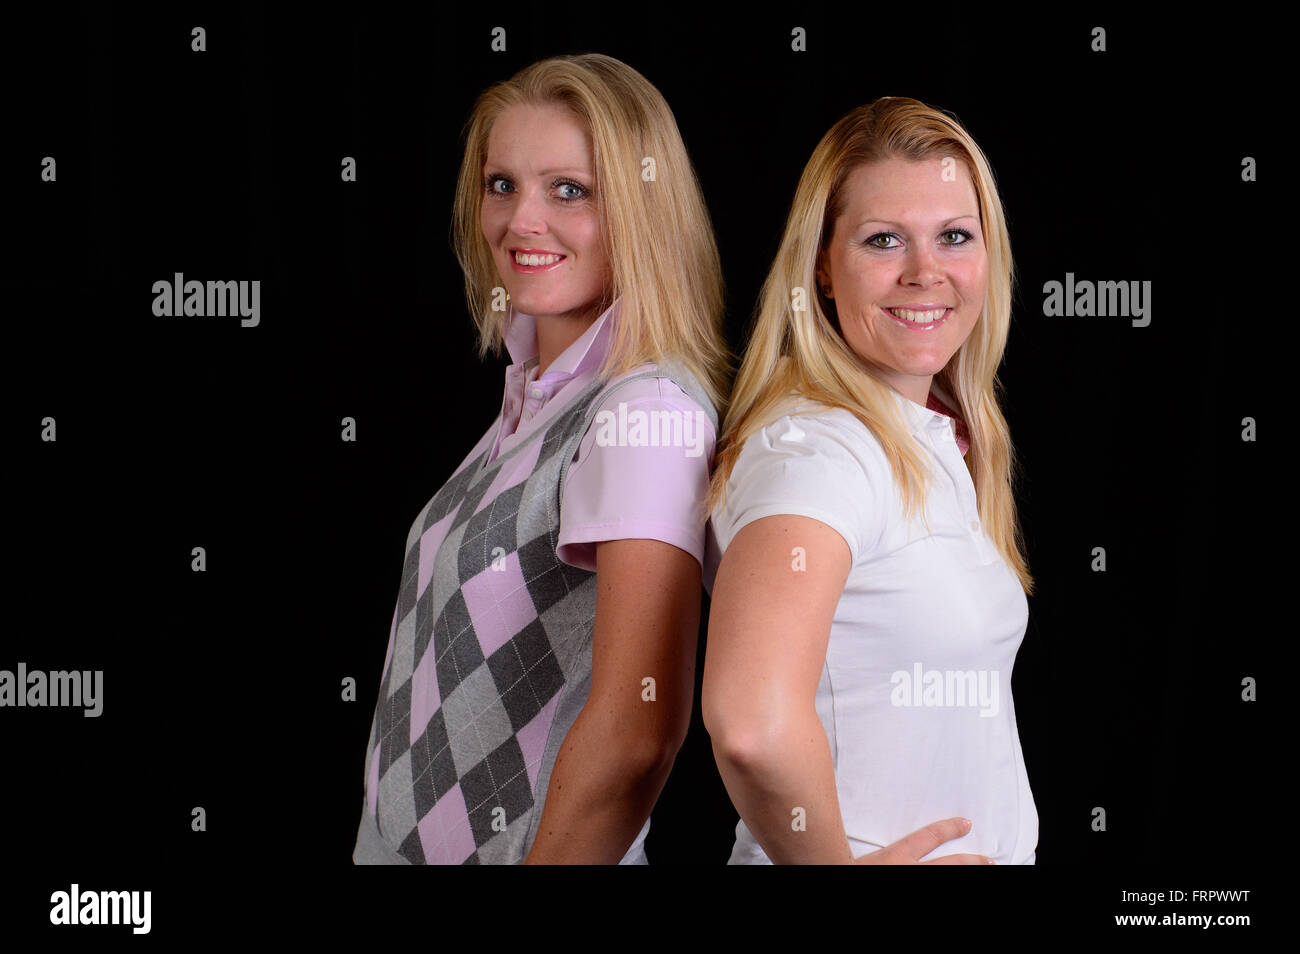 Winter Haven, Florida, USA. 19th Mar, 2013. Caroline Westrup and Benedikte Grotvedt during a portrait session prior to the Symetra Tour's Florida's Natural Charity Classic at the Lake Region Yacht and Country Club on Mar 19, 2013 in Winter Haven, Florida. ZUMA PRESS/Scott A. Miller © Scott A. Miller/ZUMA Wire/Alamy Live News Stock Photo